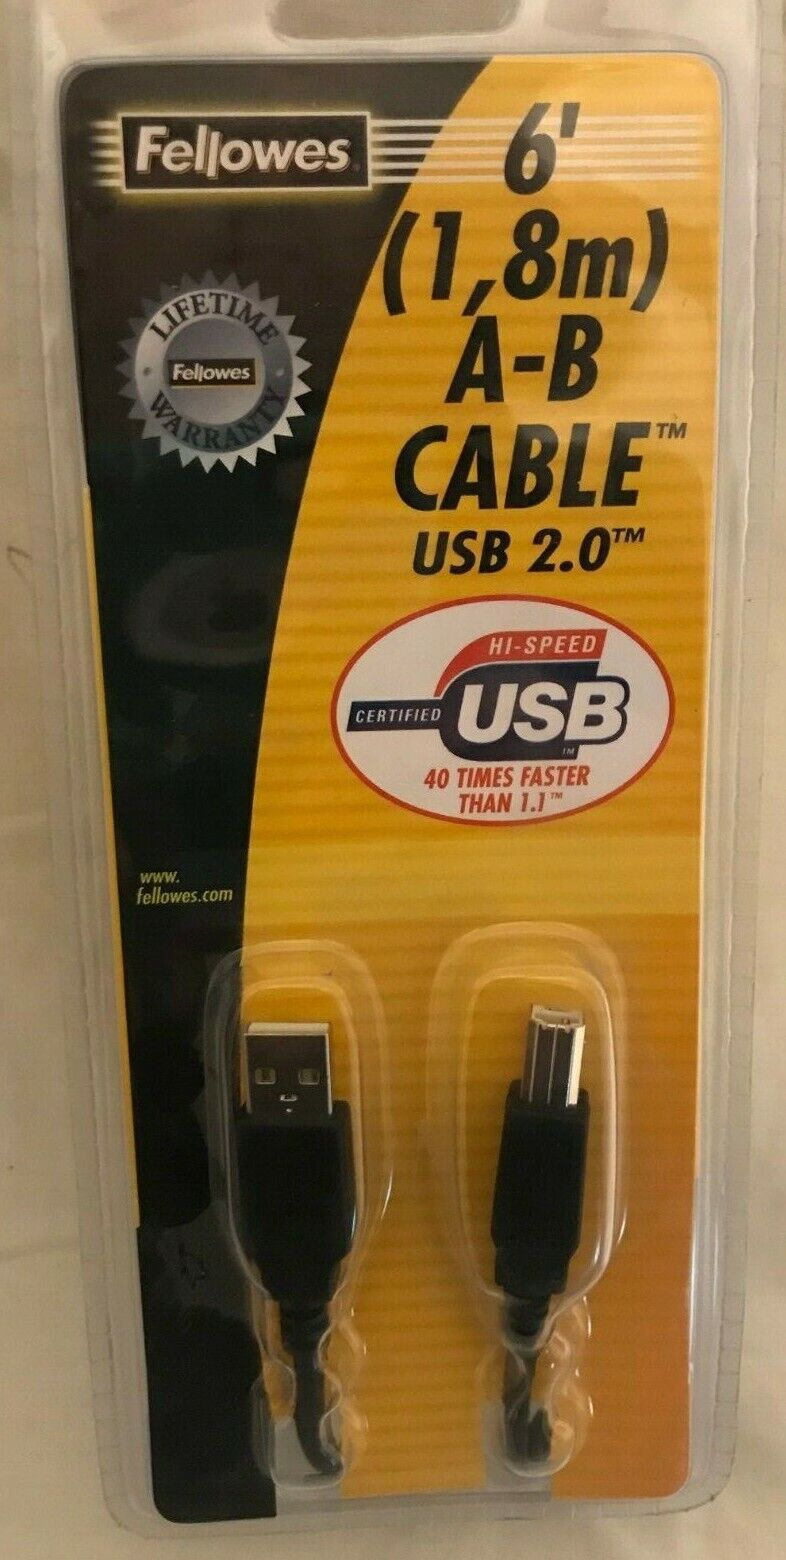 Fellowes 6 Foot (1,8m) A-B Cable USB 2.0, #99465  - NEW